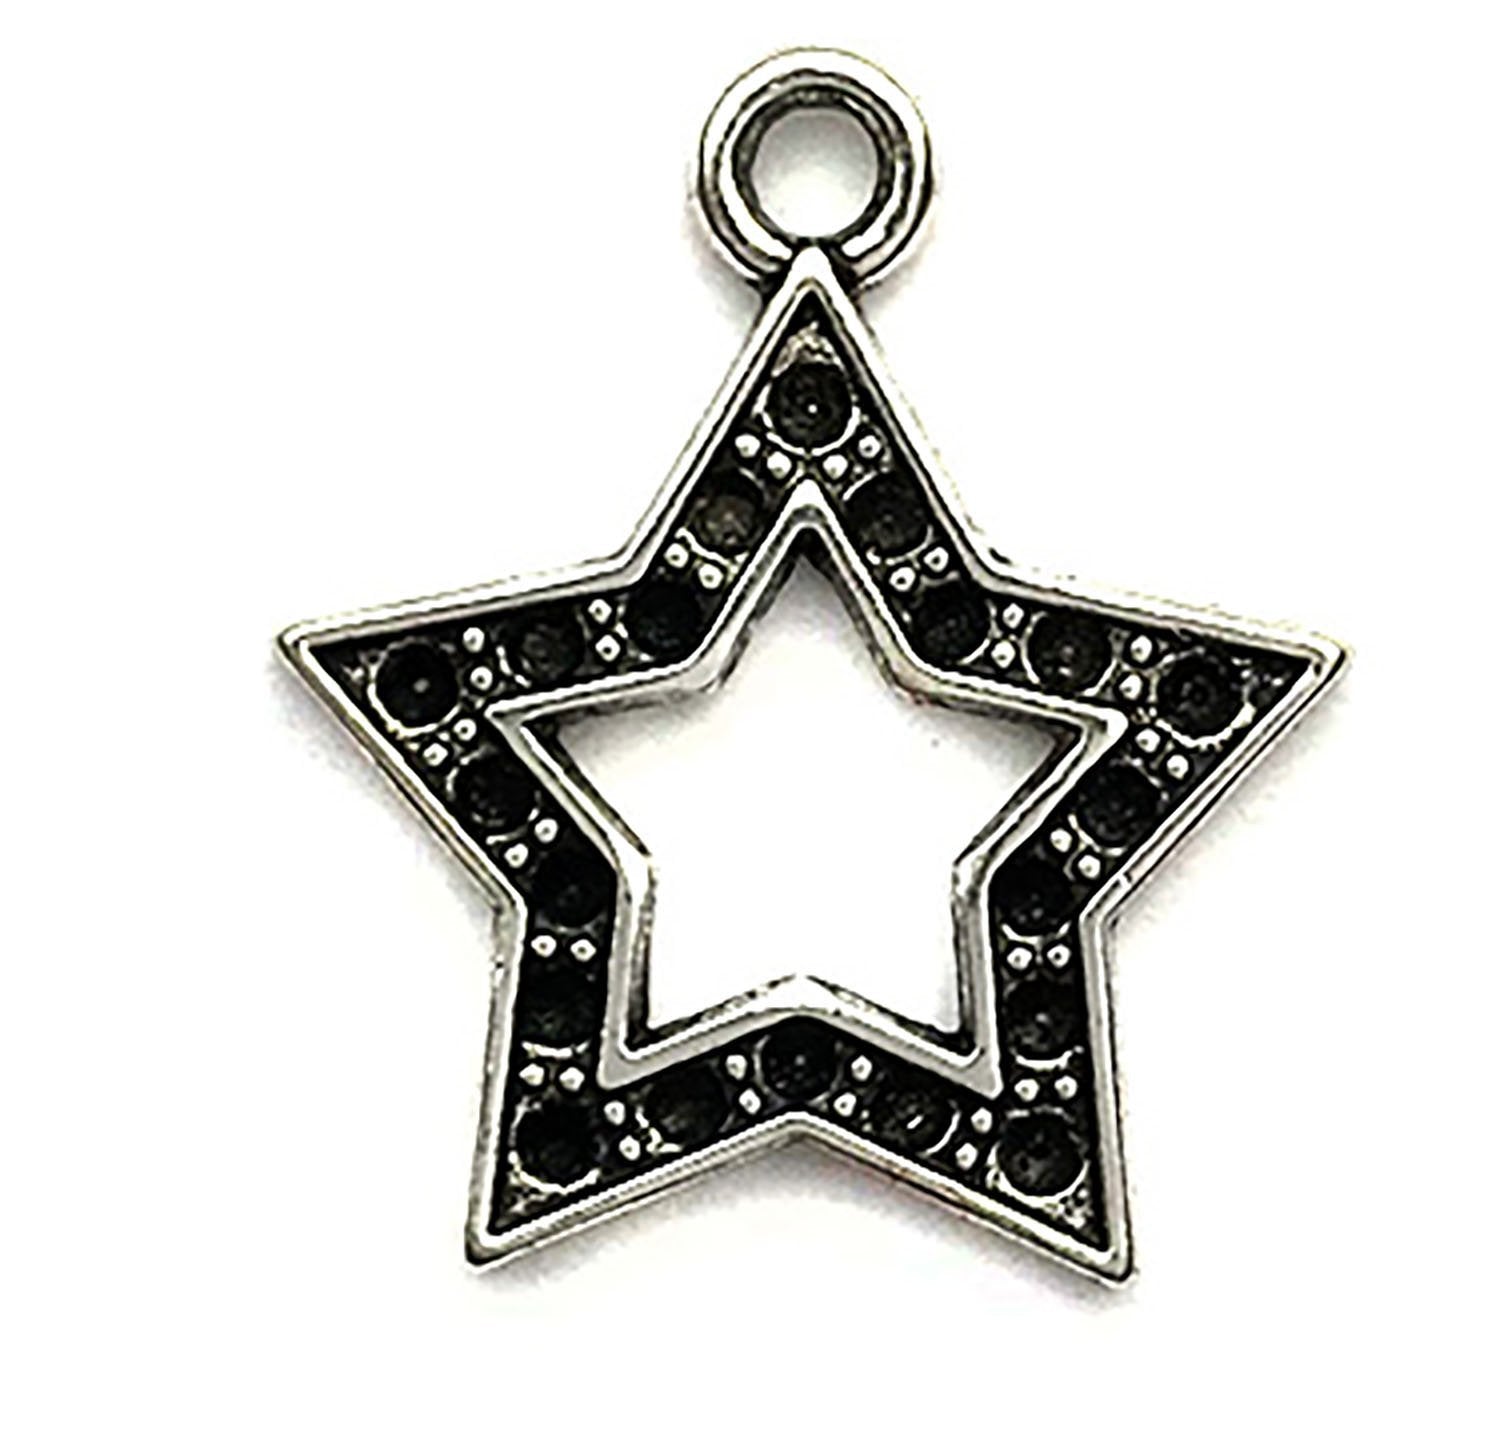 Star Charm - Buttons Galore and More